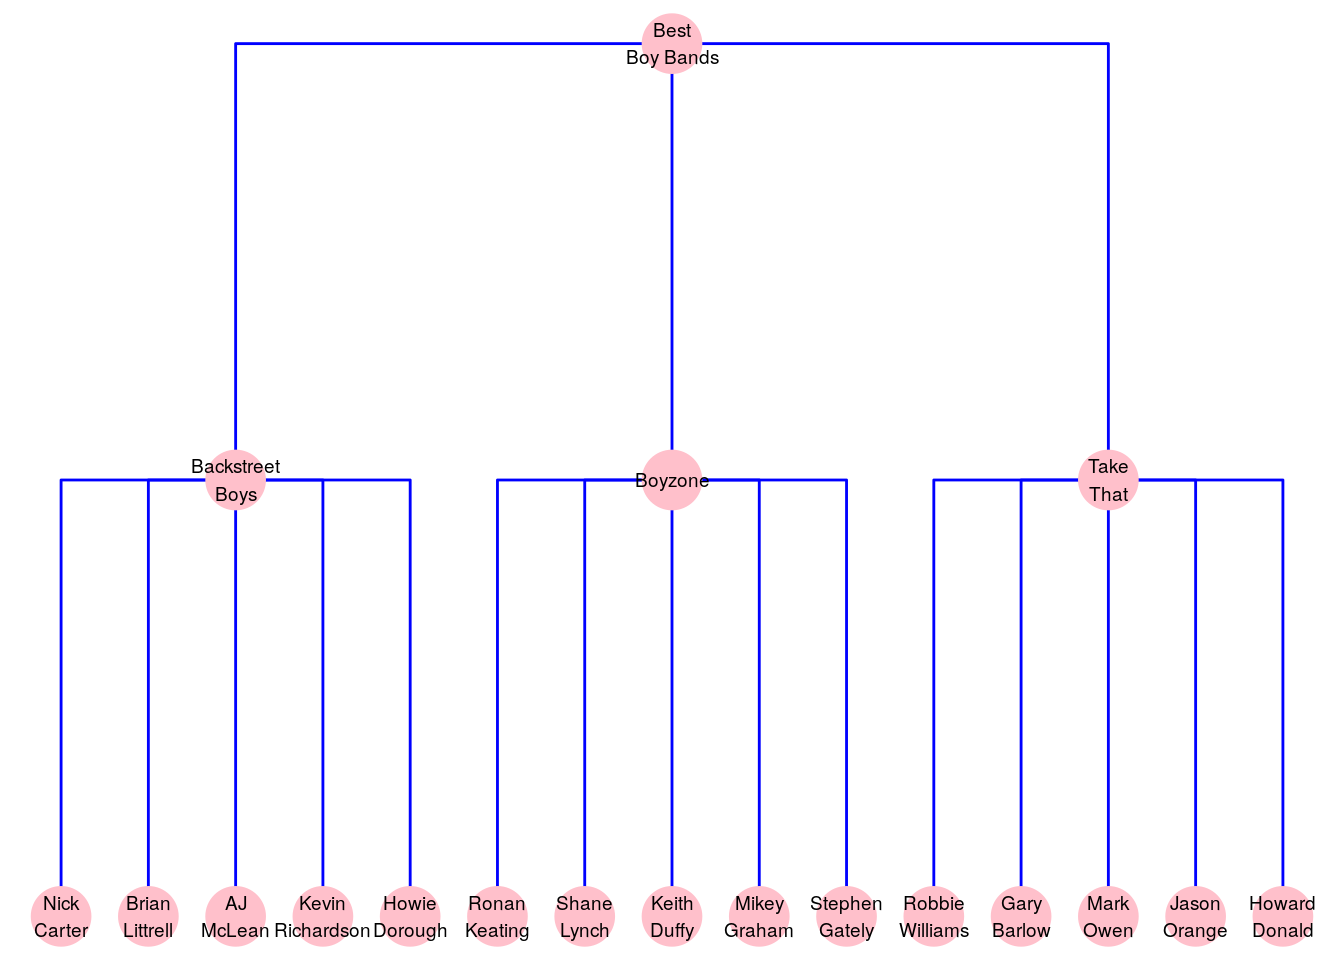 Membership of the exclusive class of the author's favorite boy bands can be represented as a tree graph